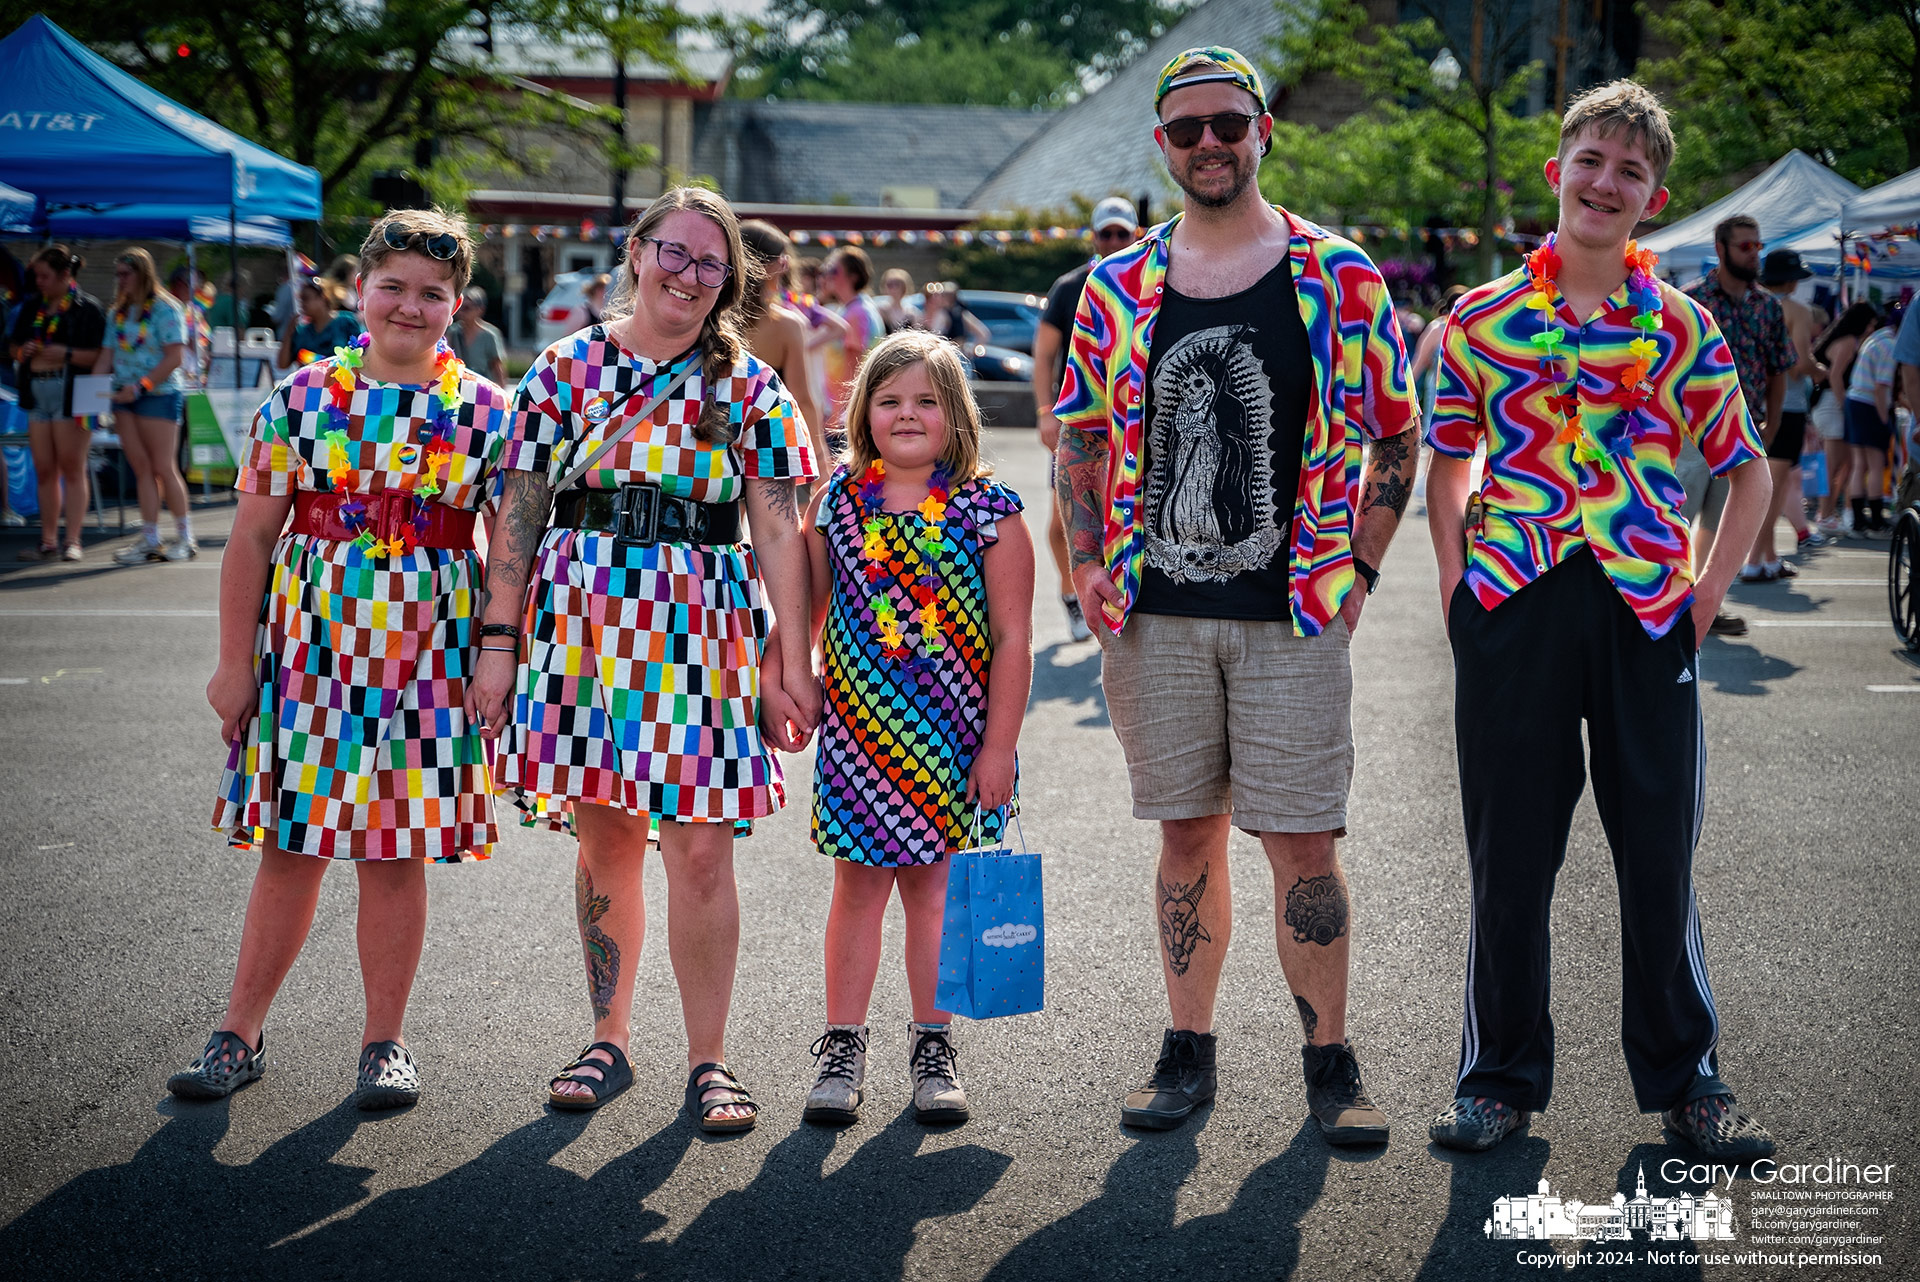 The Decker family, from left to right, Alyce, Katie, Blive, Kevin, and Aaren, pose for a photo wearing rainbow-colored clothing at the Pride celebration in the parking lot in front of Birdies Books on North State Street in Uptown Westerville. My Final Photo for June 22, 2024.